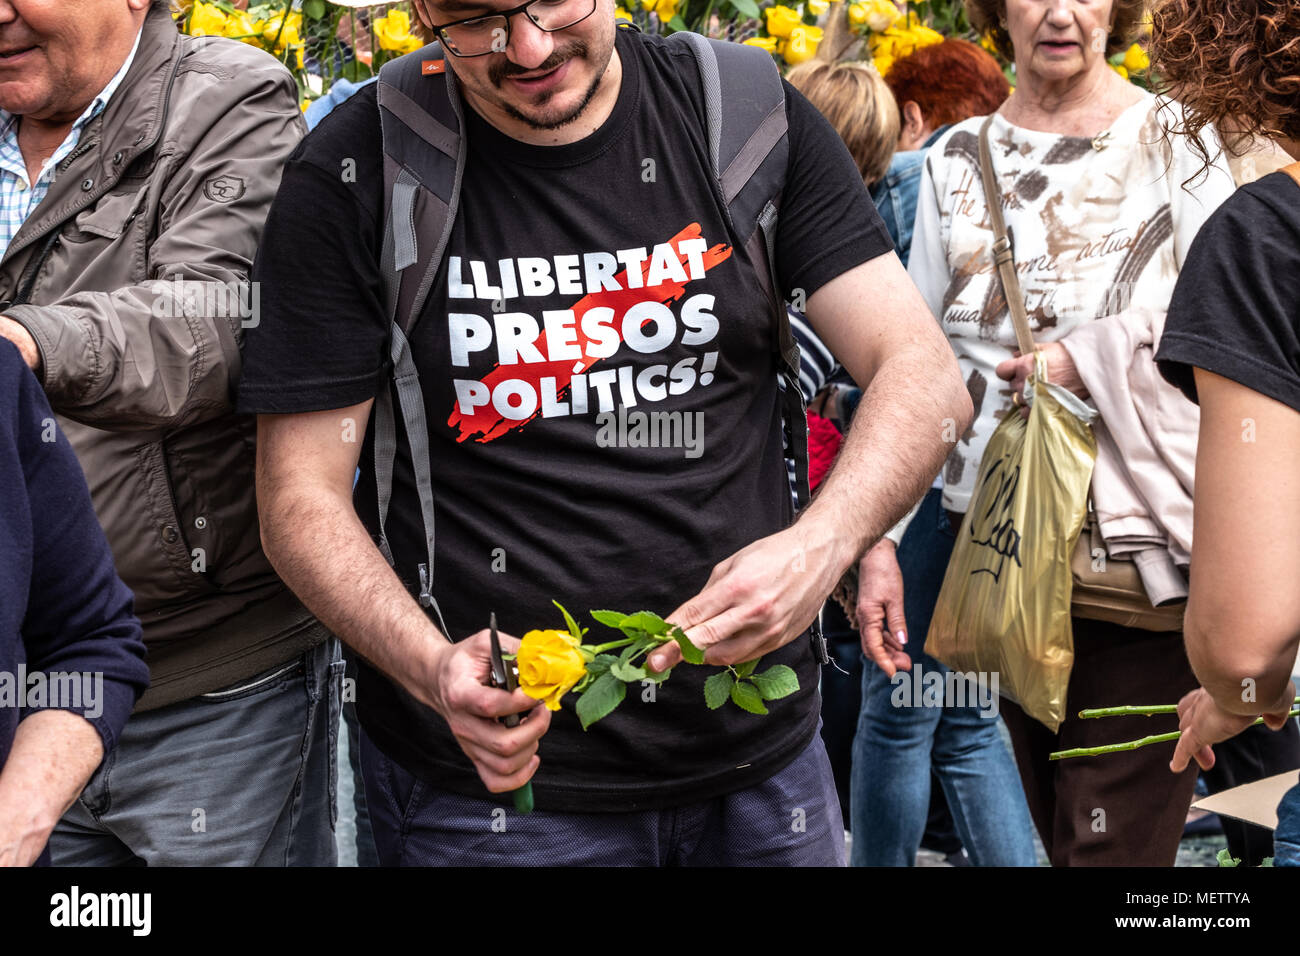 Barcelona, Spain. 23rd April, 2018. A young man is seen preparing yellow roses wearing a T-shirt to support political prisoners. Catalunya celebrates the 'Day of Sant Jordi', the day of books and roses. Catalunya hopes to reach the figure of 7 million roses sold. It is tradition to give a rose or a book among lovers. Numerous literary authors sign their books to the public on the street. Credit: SOPA Images Limited/Alamy Live News Stock Photo